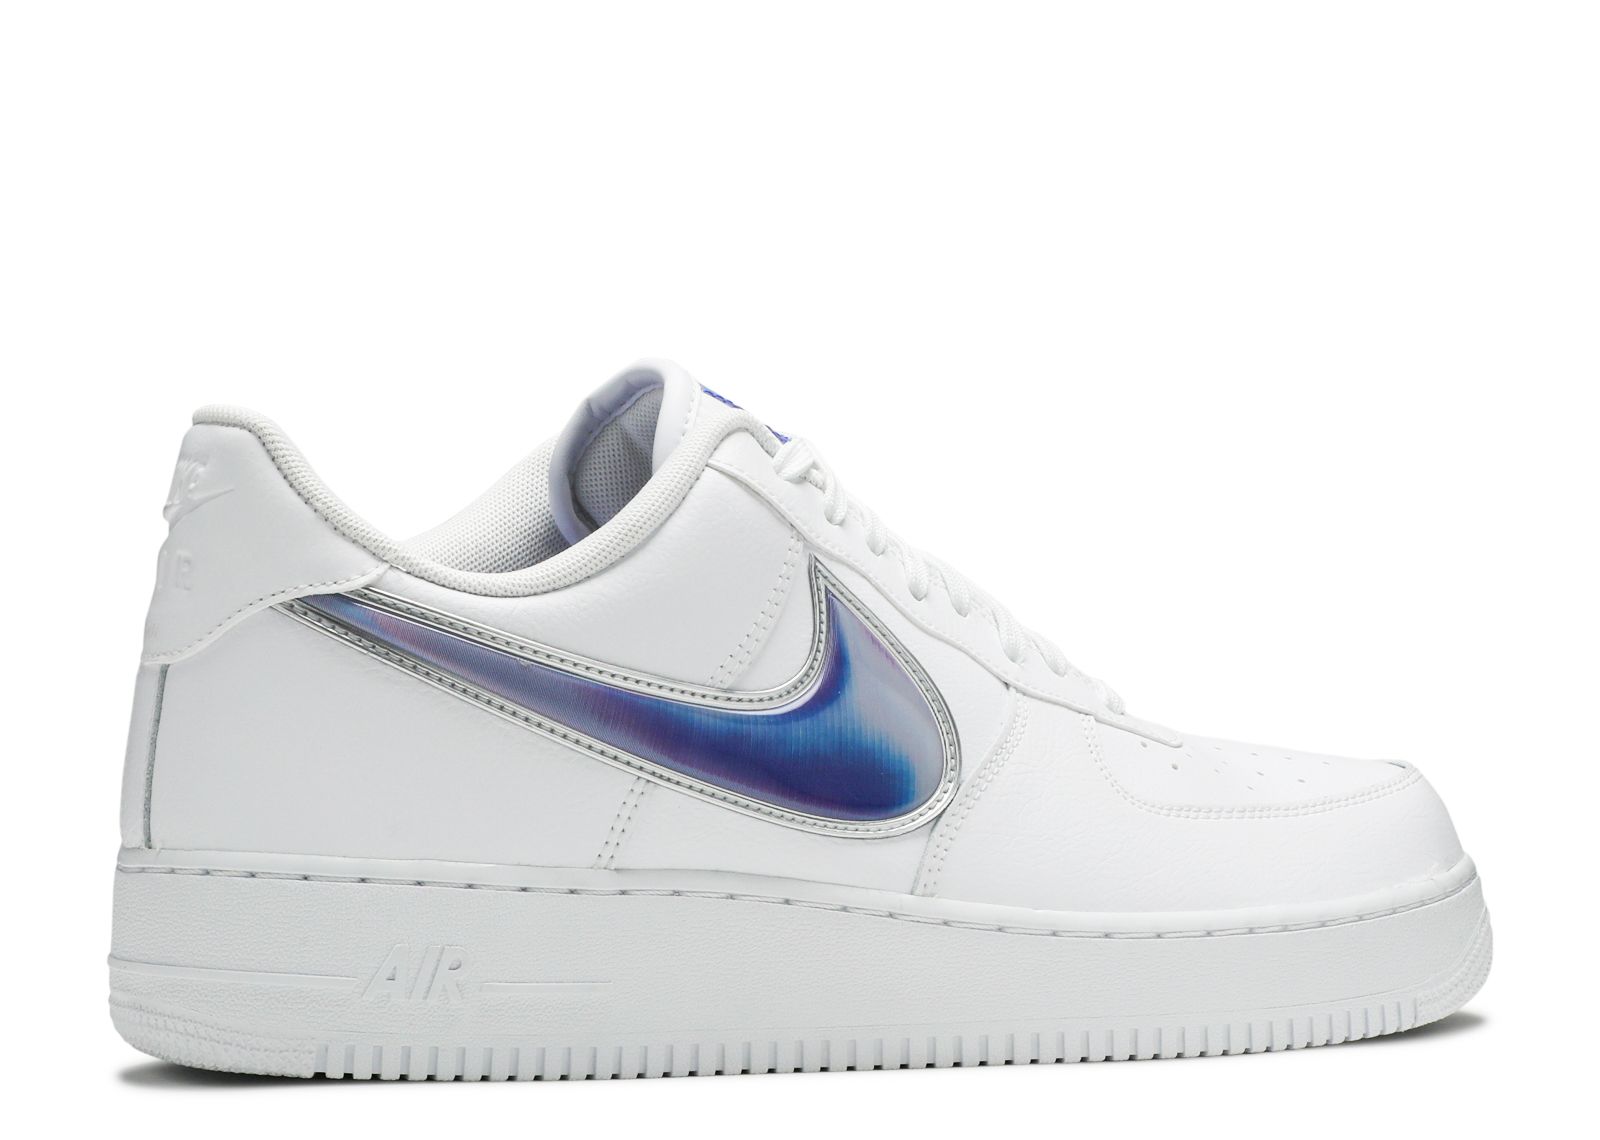 Nike Air Force 1 Low Oversized Swoosh White Racer Blue AO2441101 